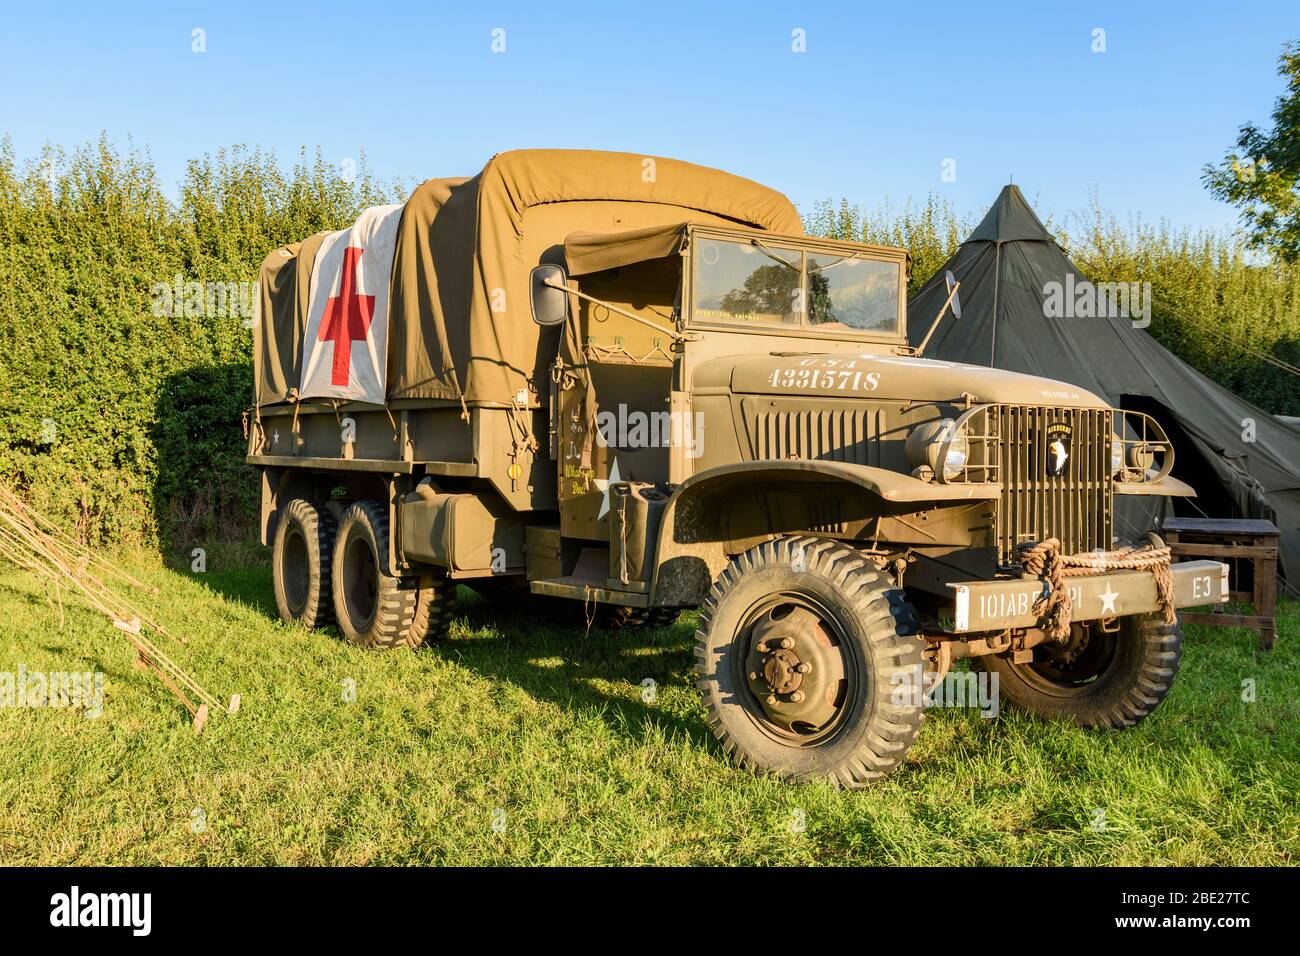 A GMC Deuce and a Half 'Jimmy' in 101 AB colours carrying an ambulance flag at a World War 2 re-enactment event Stock Photo